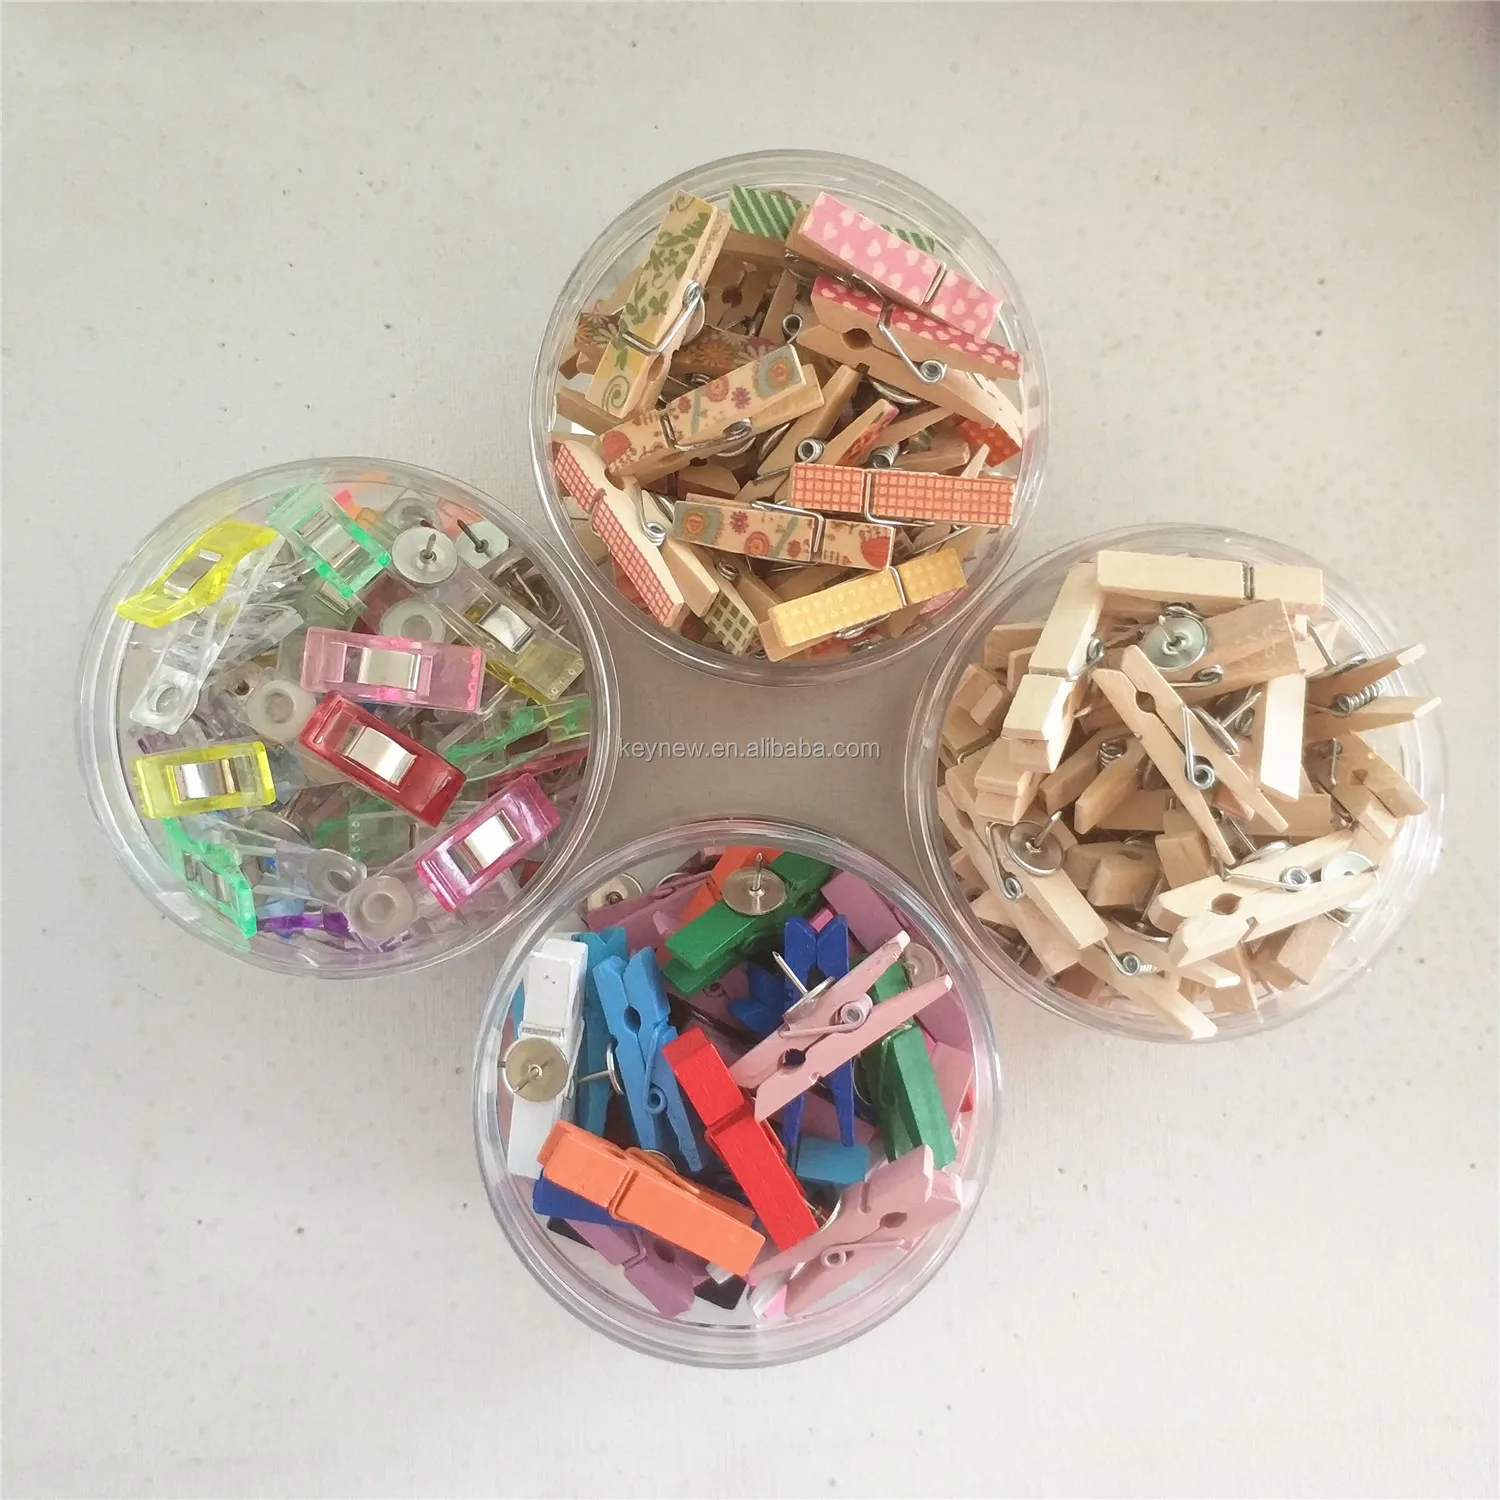 Offices and Homes Eeoyu 50 Pieces Wooden Push Pins Clips Wooden Photo Pins Pushpins with Wooden Clips for Cork Boards Artworks Notes Photos Craft Projects 